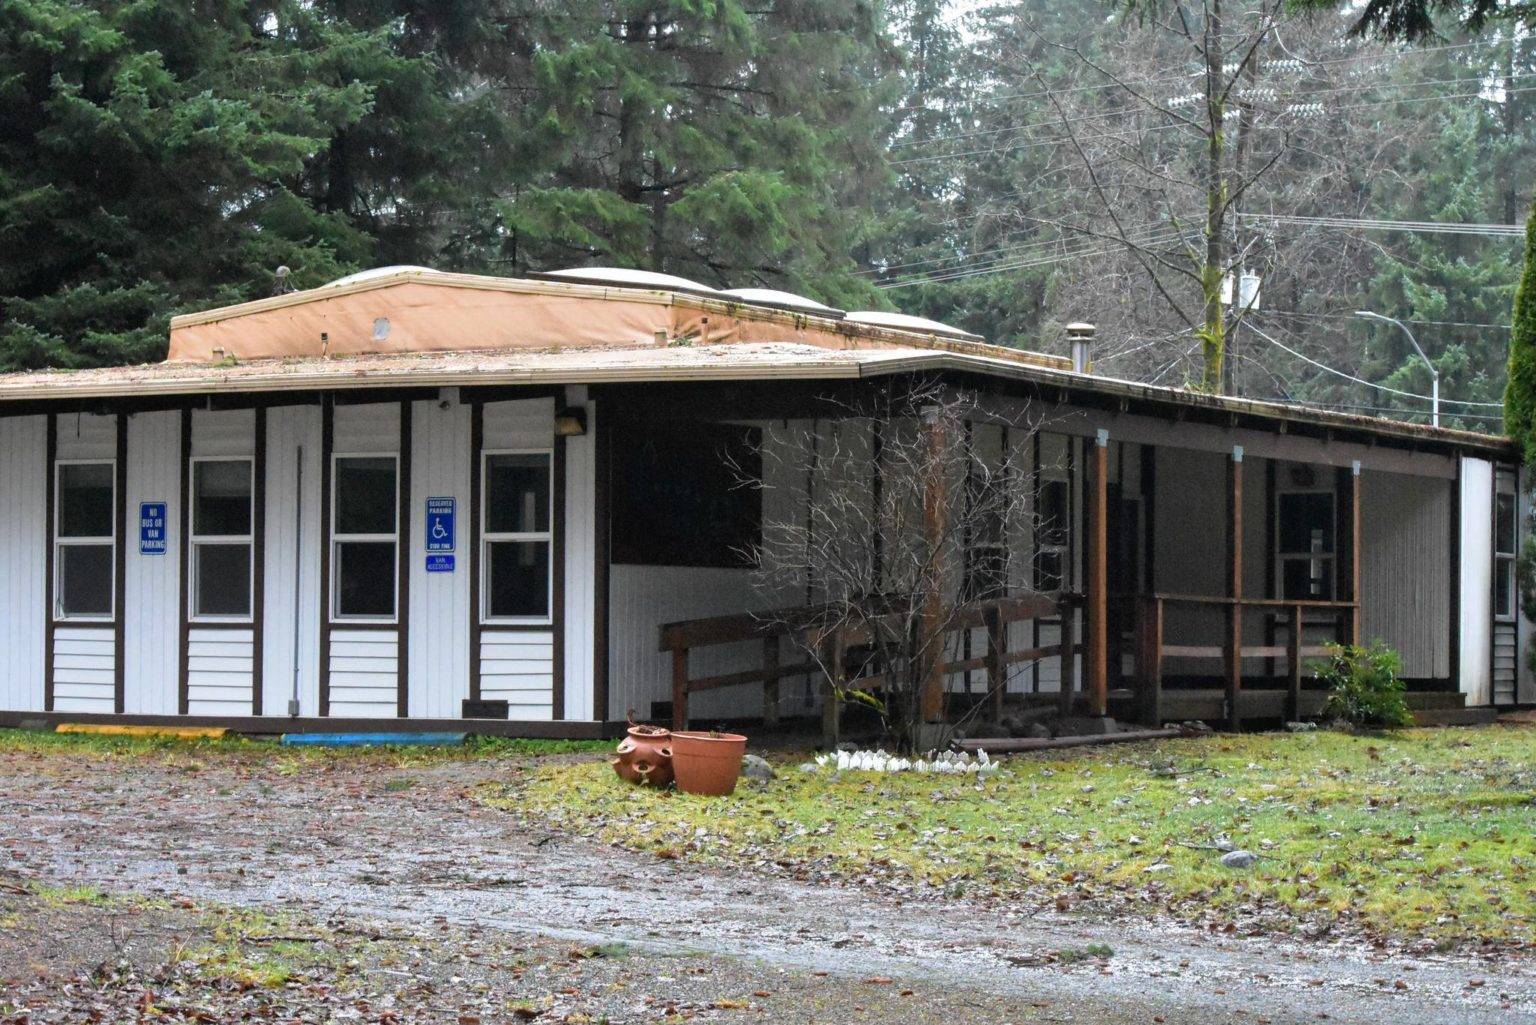 The property at 9290 Hurlock Avenue near the intersection of Egan Drive and Mendenhall Loop Road was vacant Monday, Dec. 7, 2020, but a group of nonprofit organizations are partnering to turn the site into a youth homeless center. The City and Borough of Juneau Assembly Finance Committee voted unanimously Wednesday evening to draft an ordinance allocating funding to the project. (Peter Segall / Juneau Empire File)